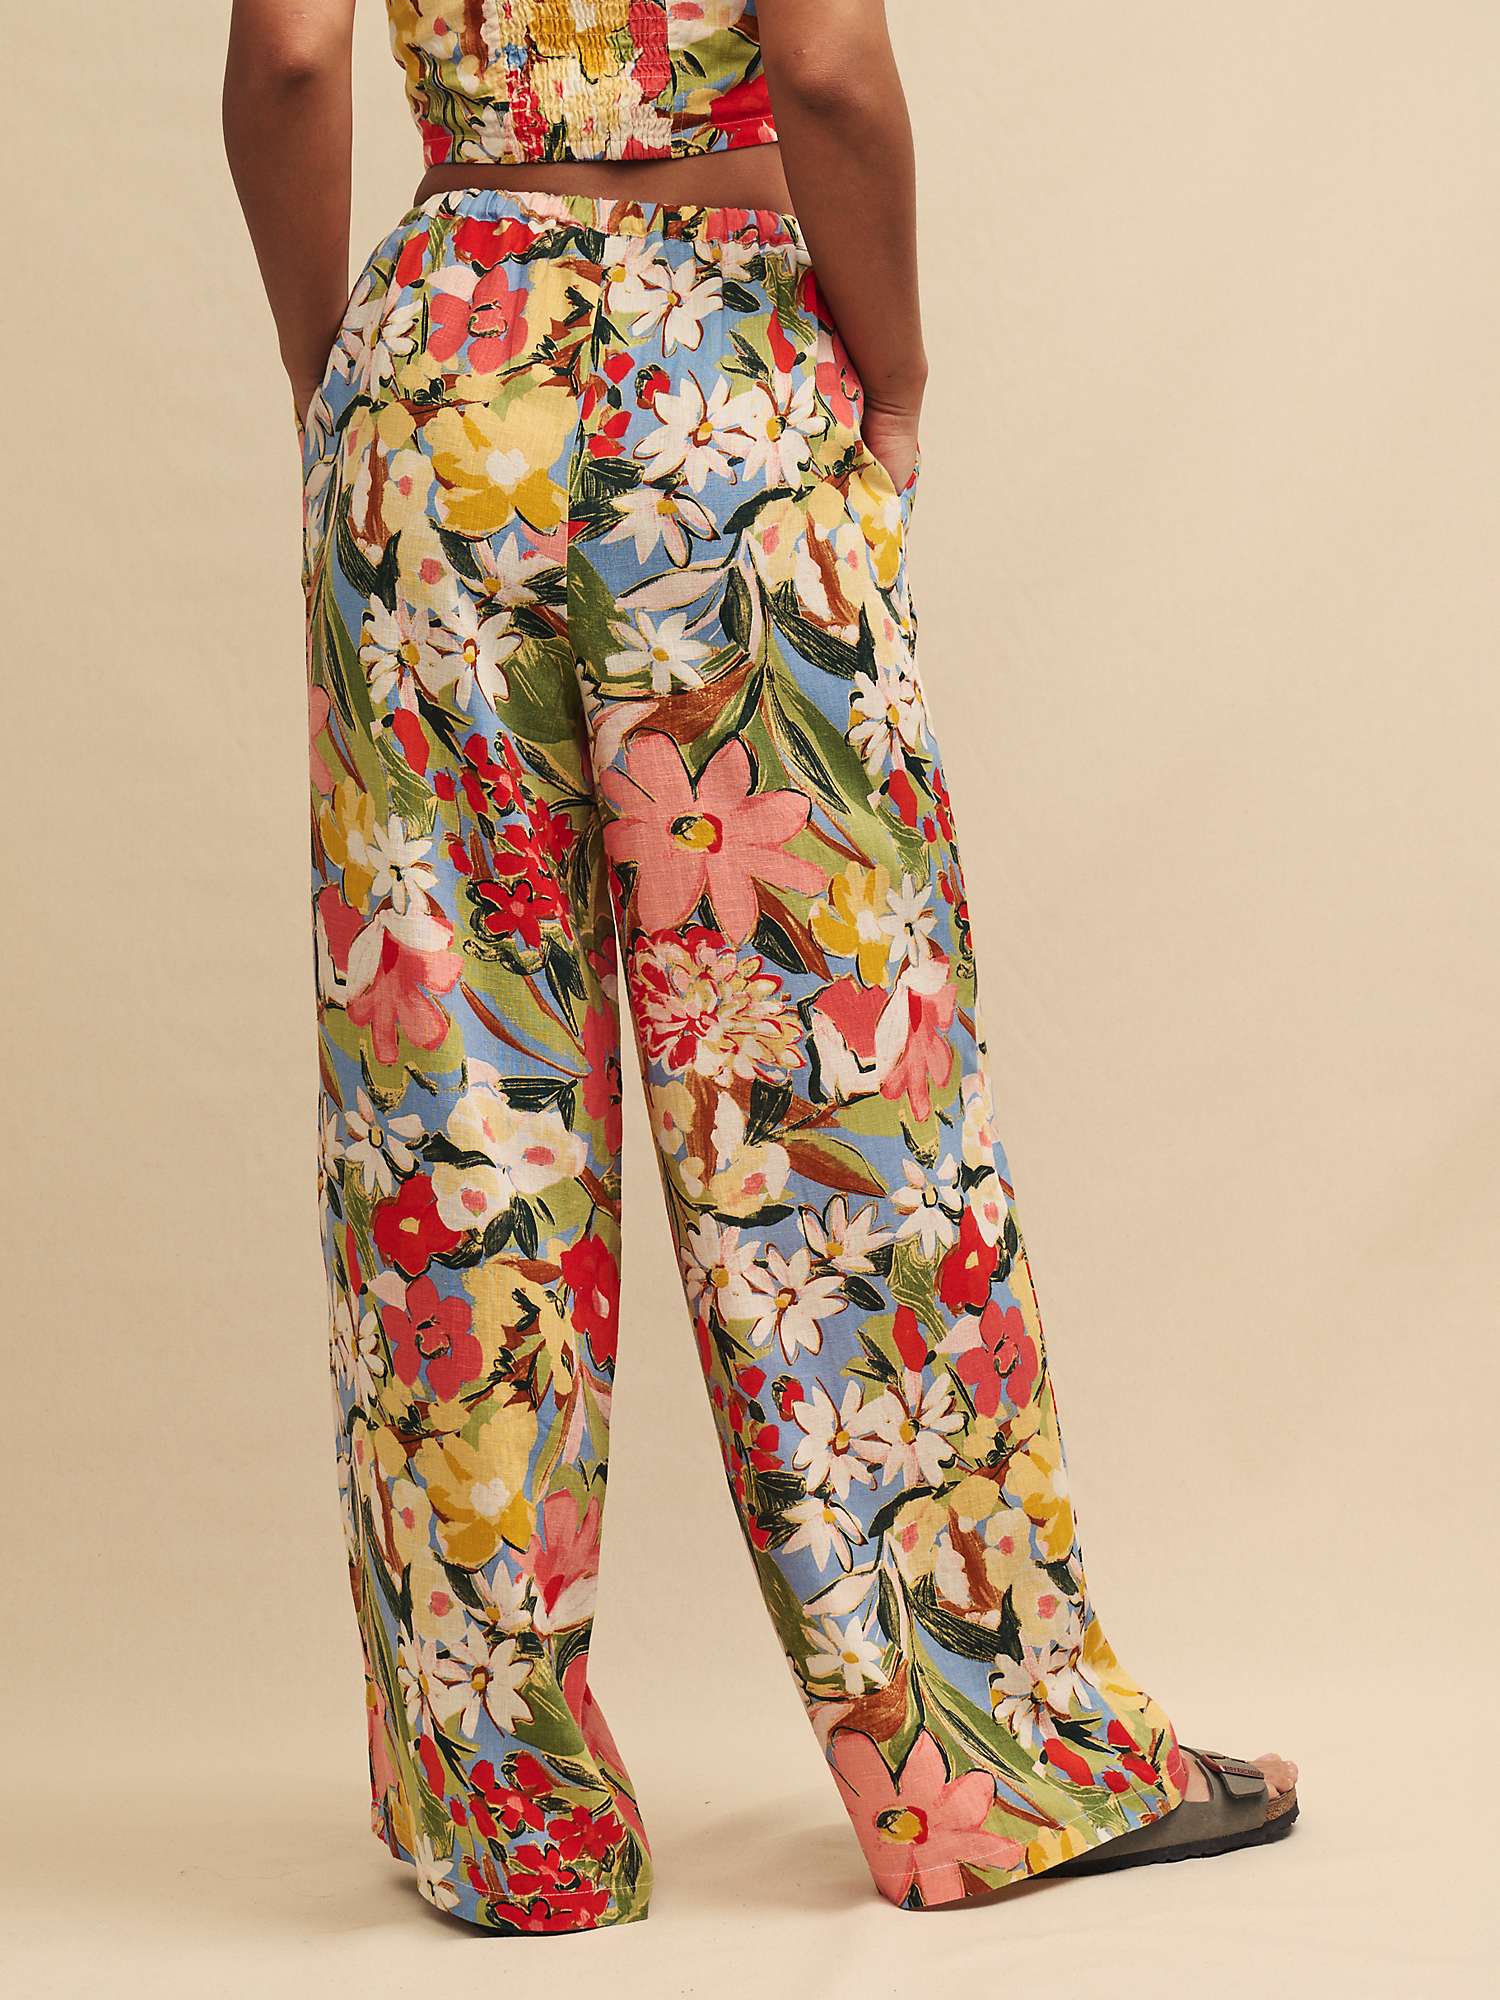 Buy Nobody s Child x Happy Place by Fearne Cotton Petite Reese Mykonos Bloom Trousers, Multi Online at johnlewis.com